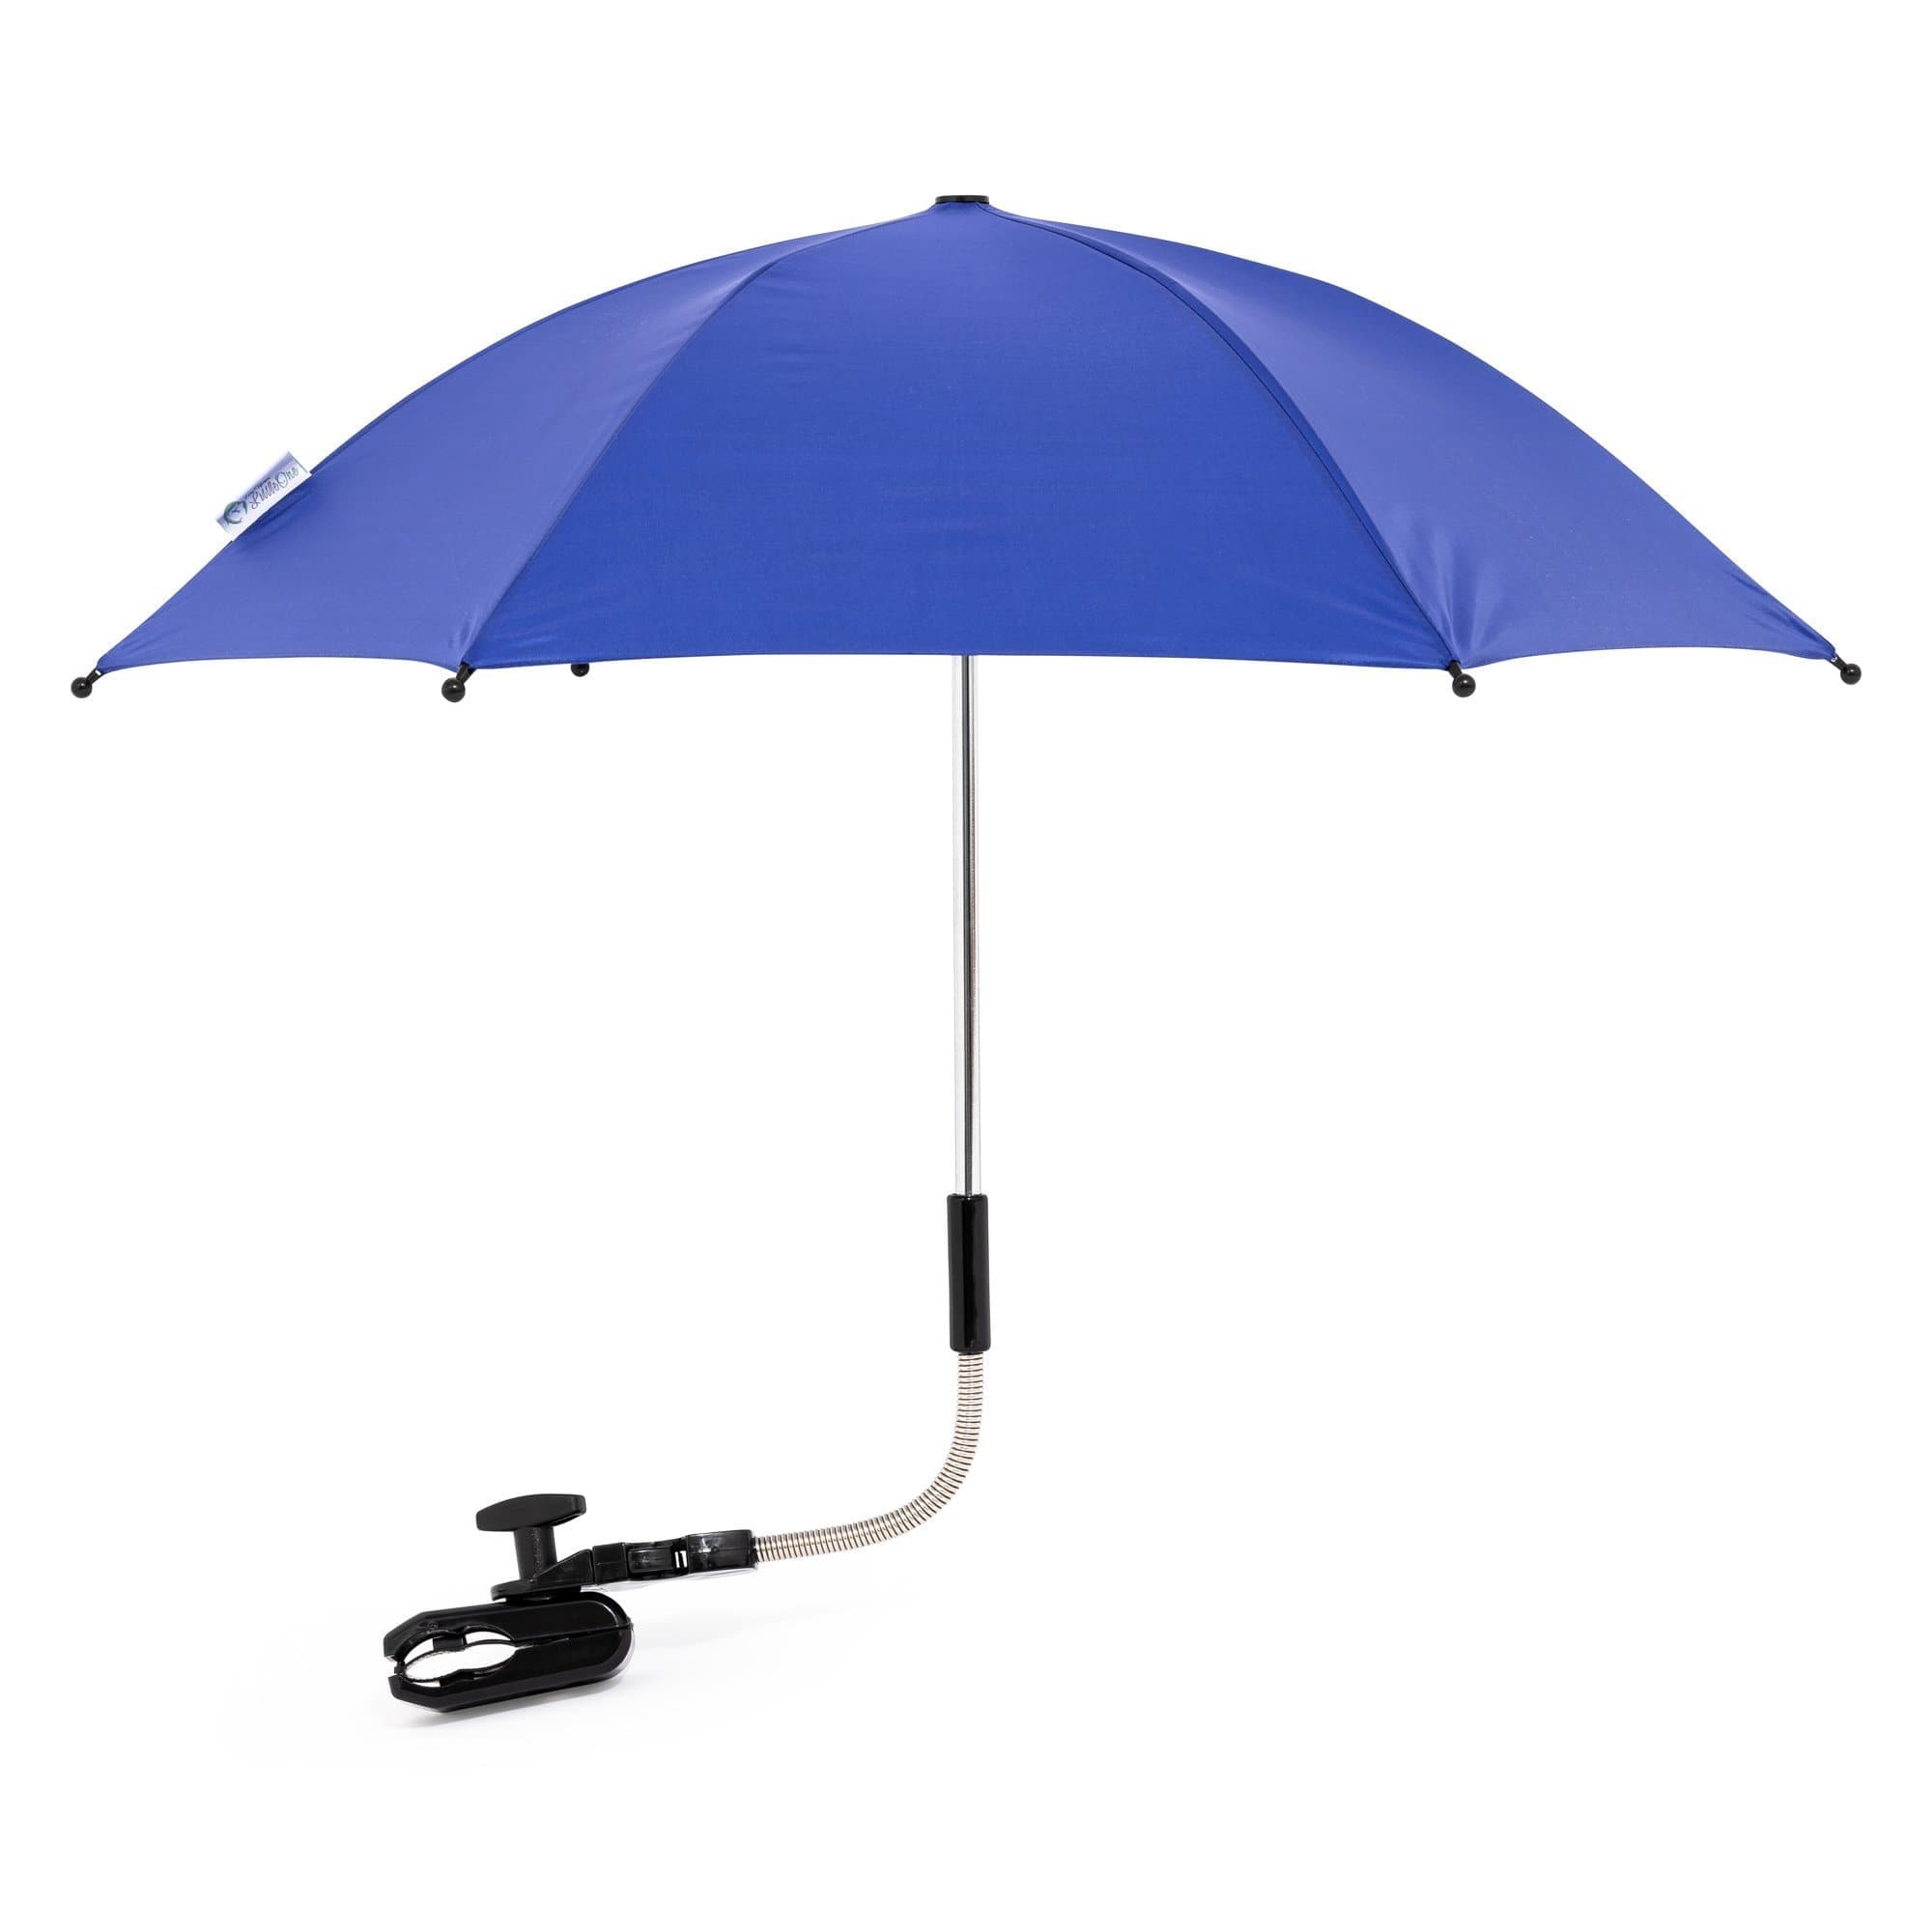 Baby Parasol Compatible With Nuna - Fits All Models - For Your Little One